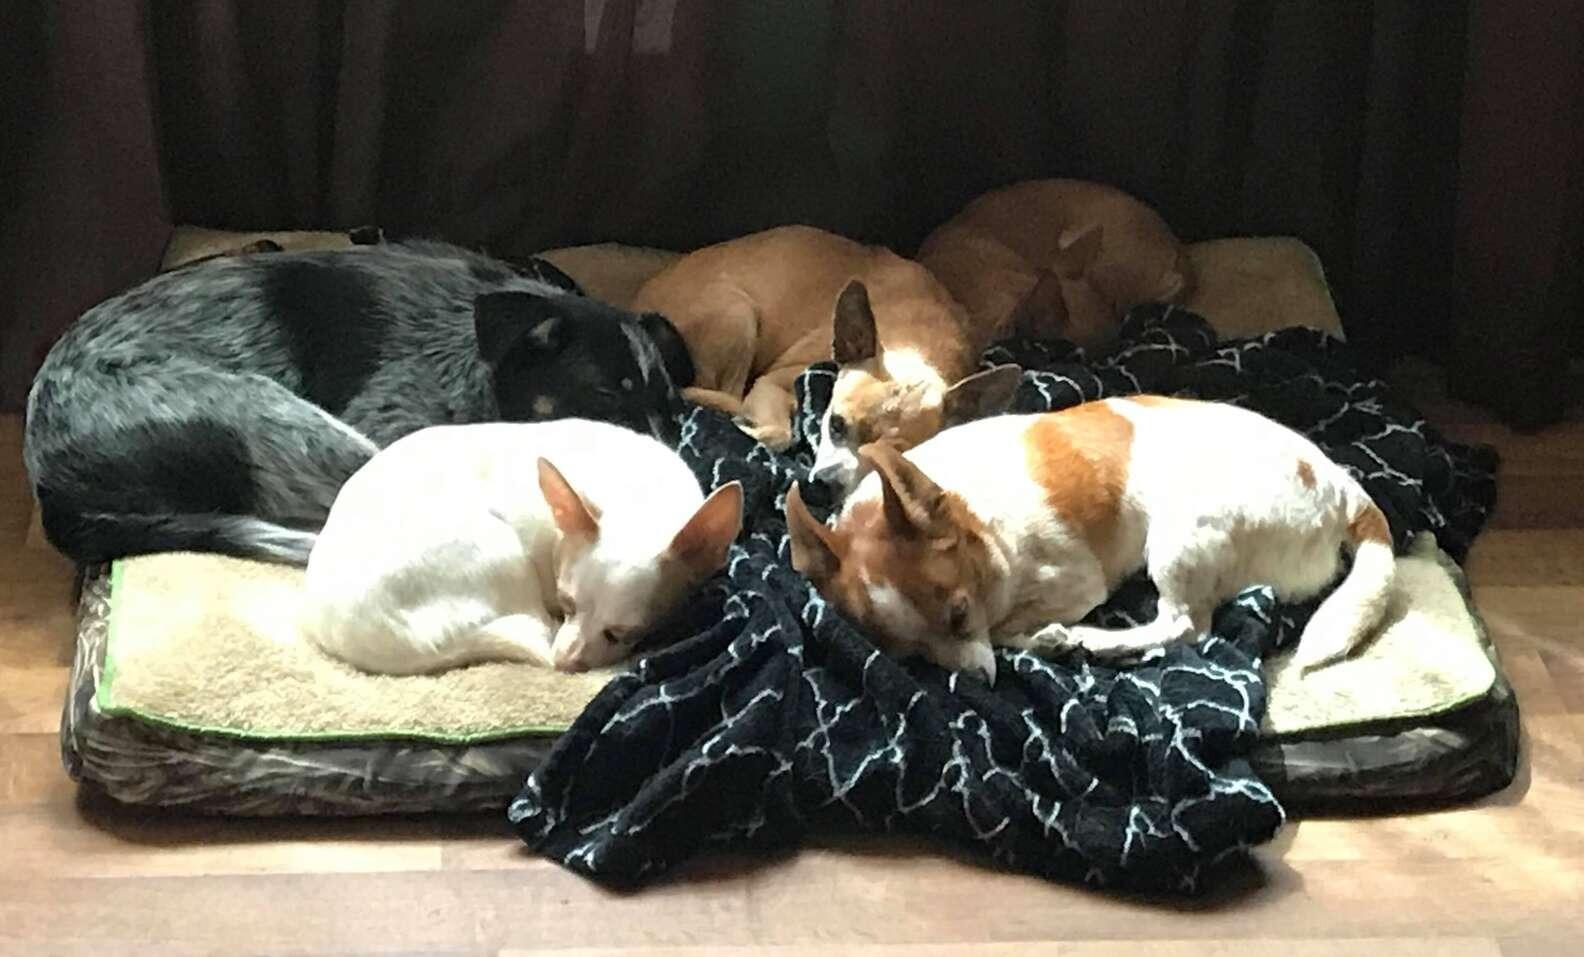 scooter sleeping with his fellow pals